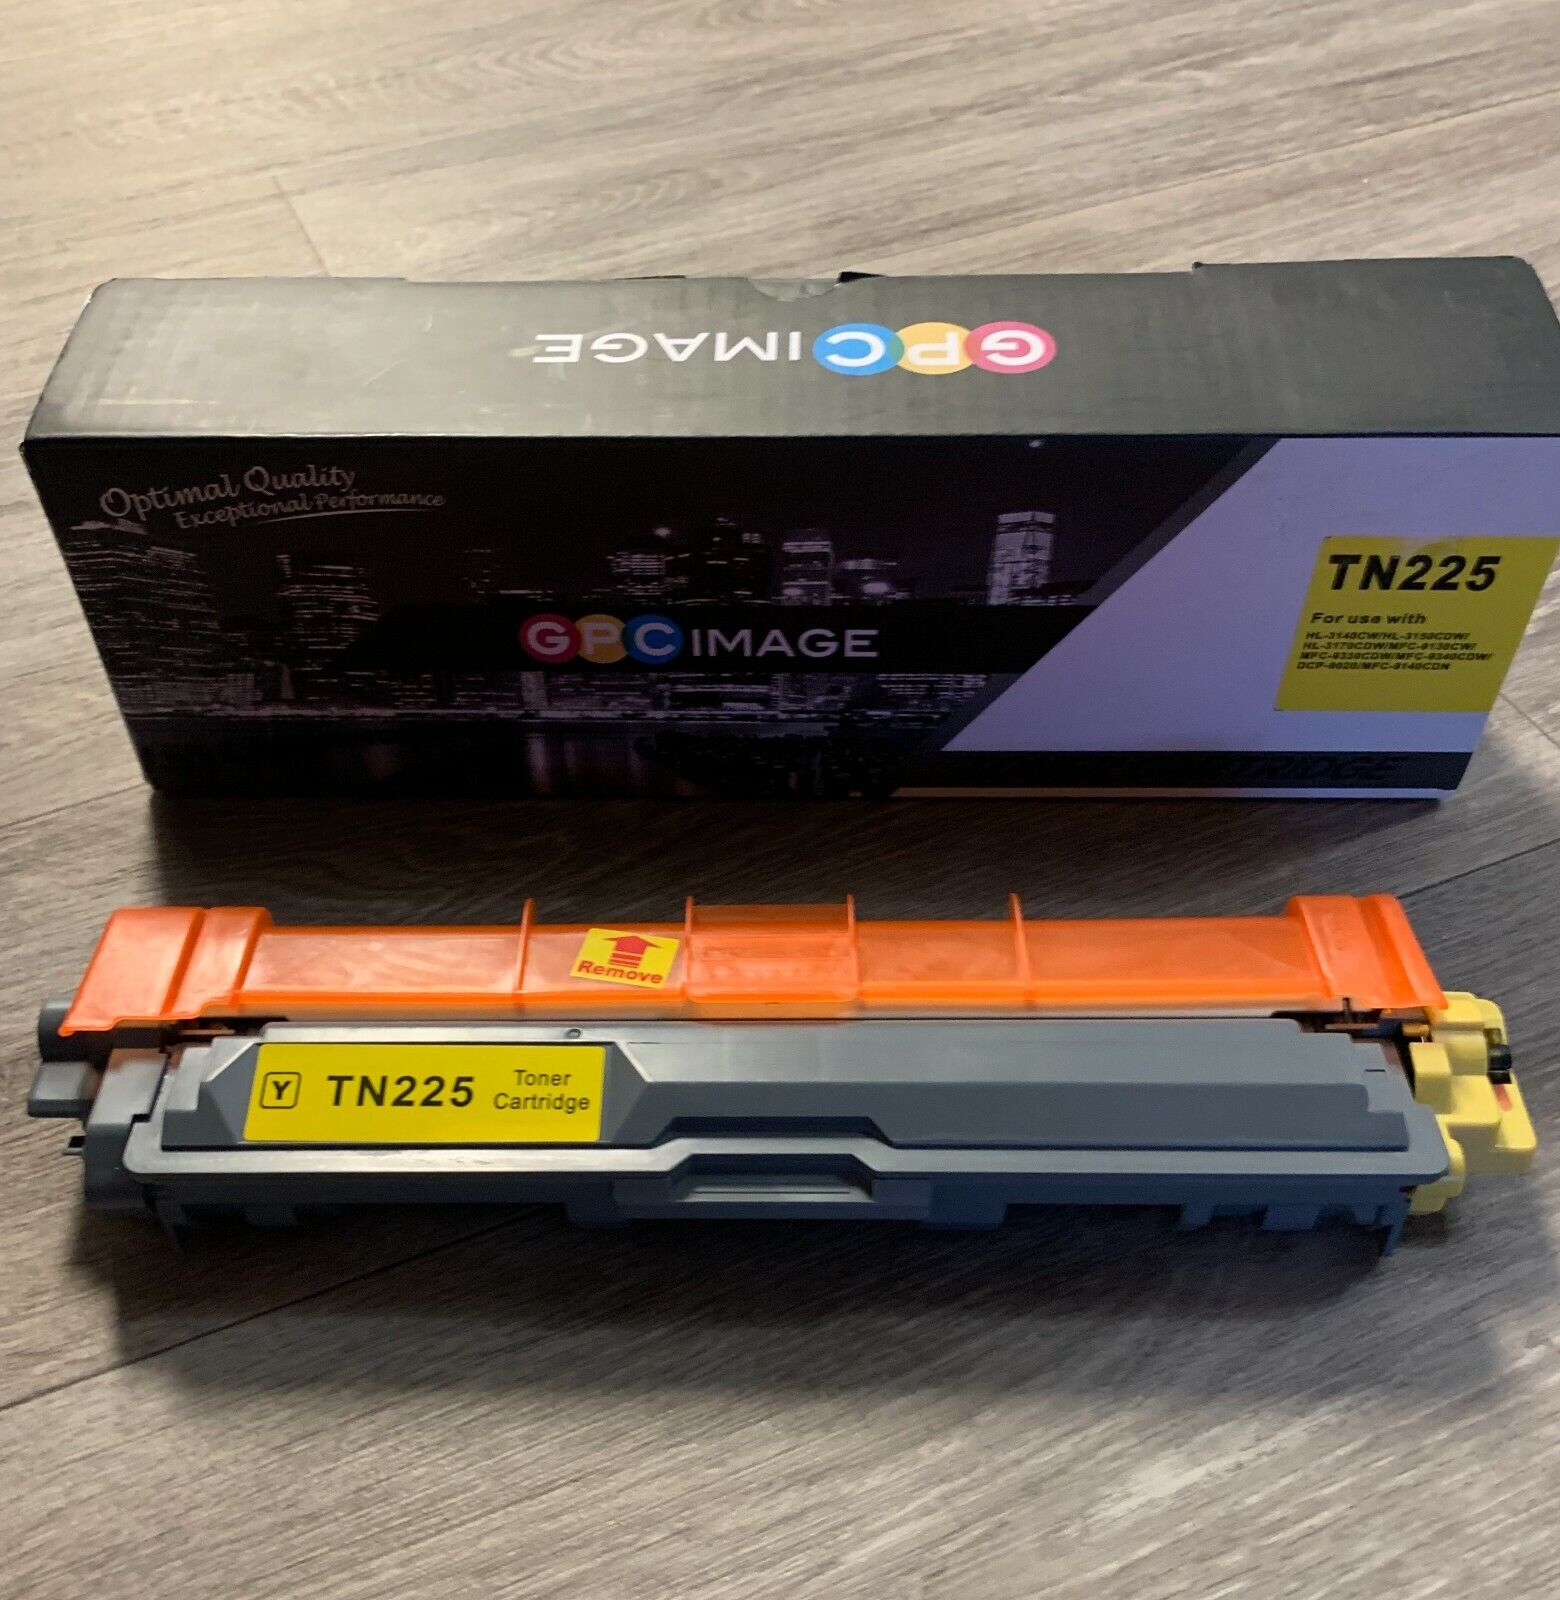 GPC Image Compatible Toner Cartridge for Brother TN225 Yellow #NO4529